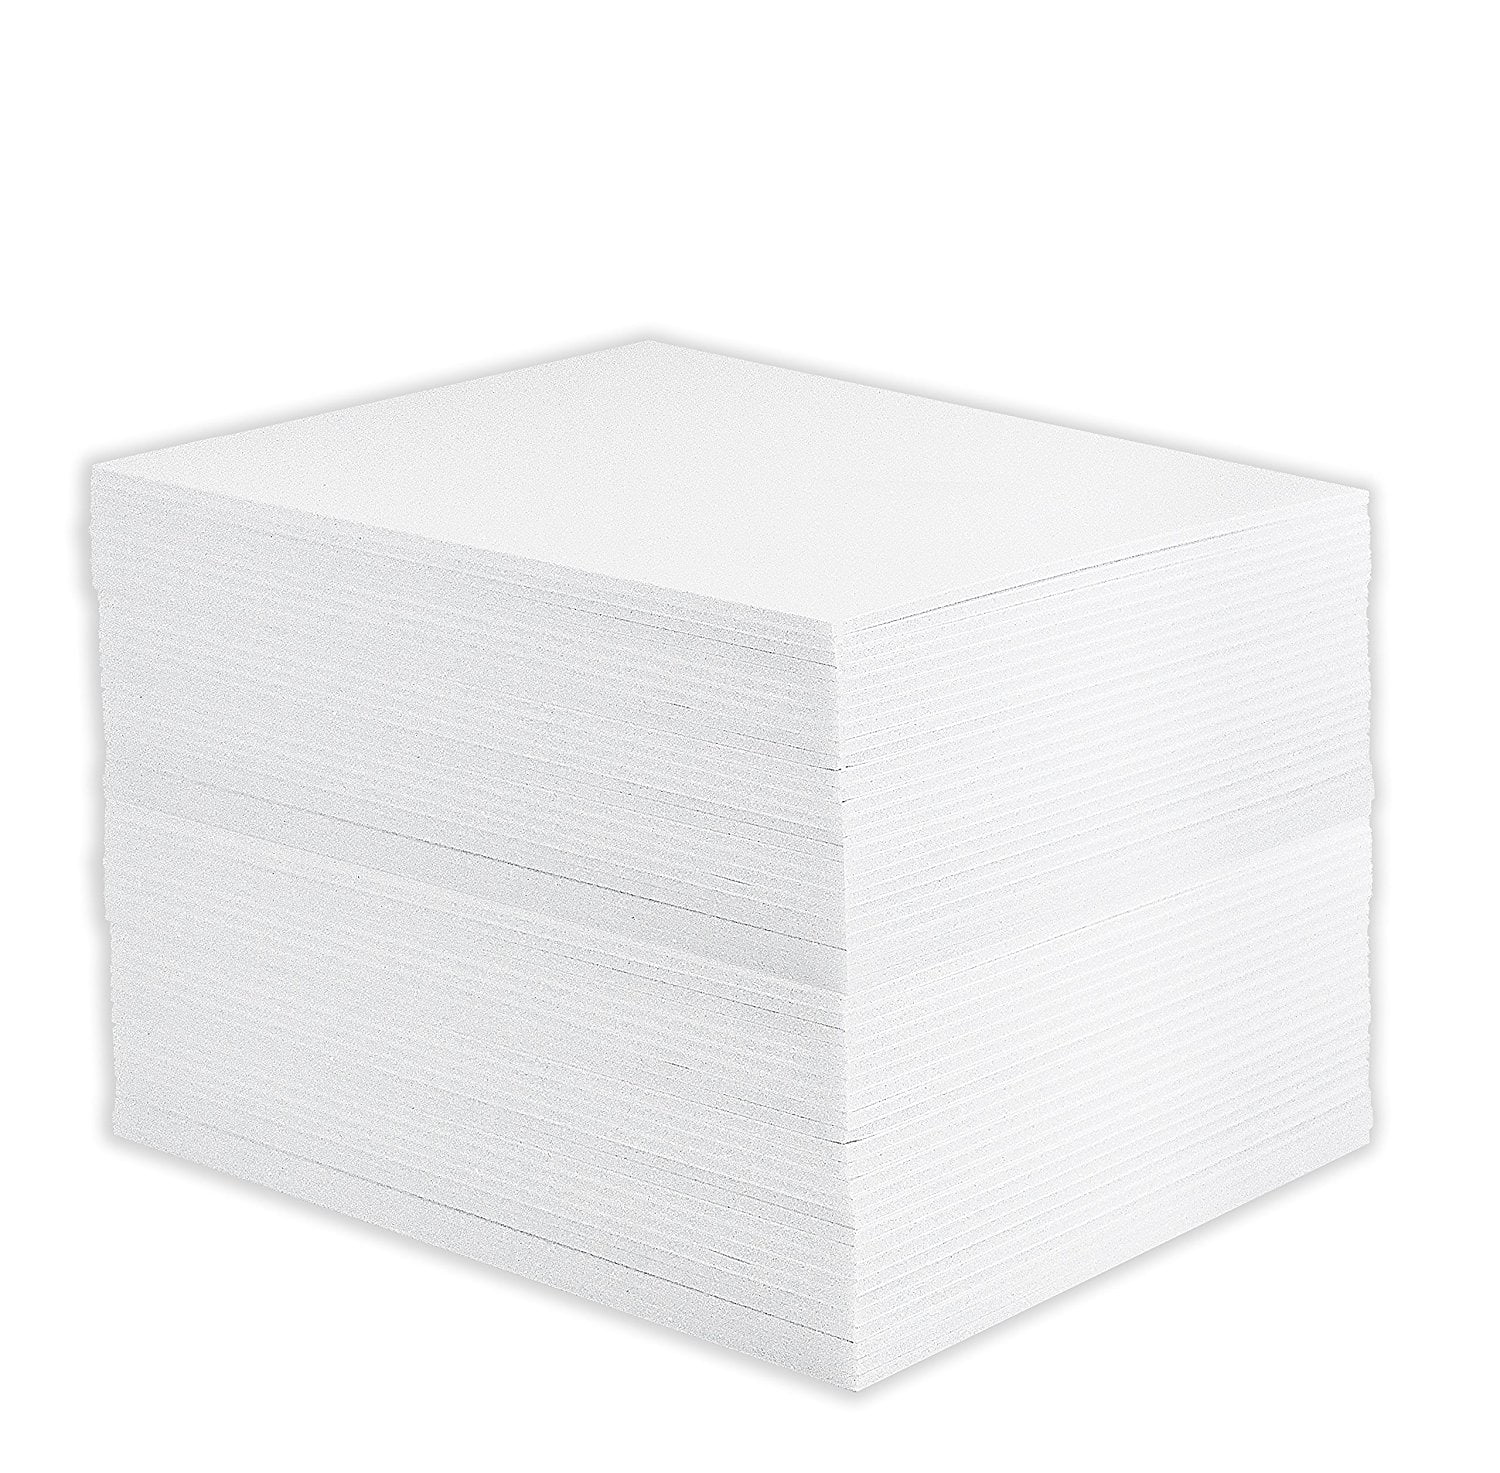 Mat Board Center Pack of 10 1/8 White Foam Core Backing Boards 11x14, White 